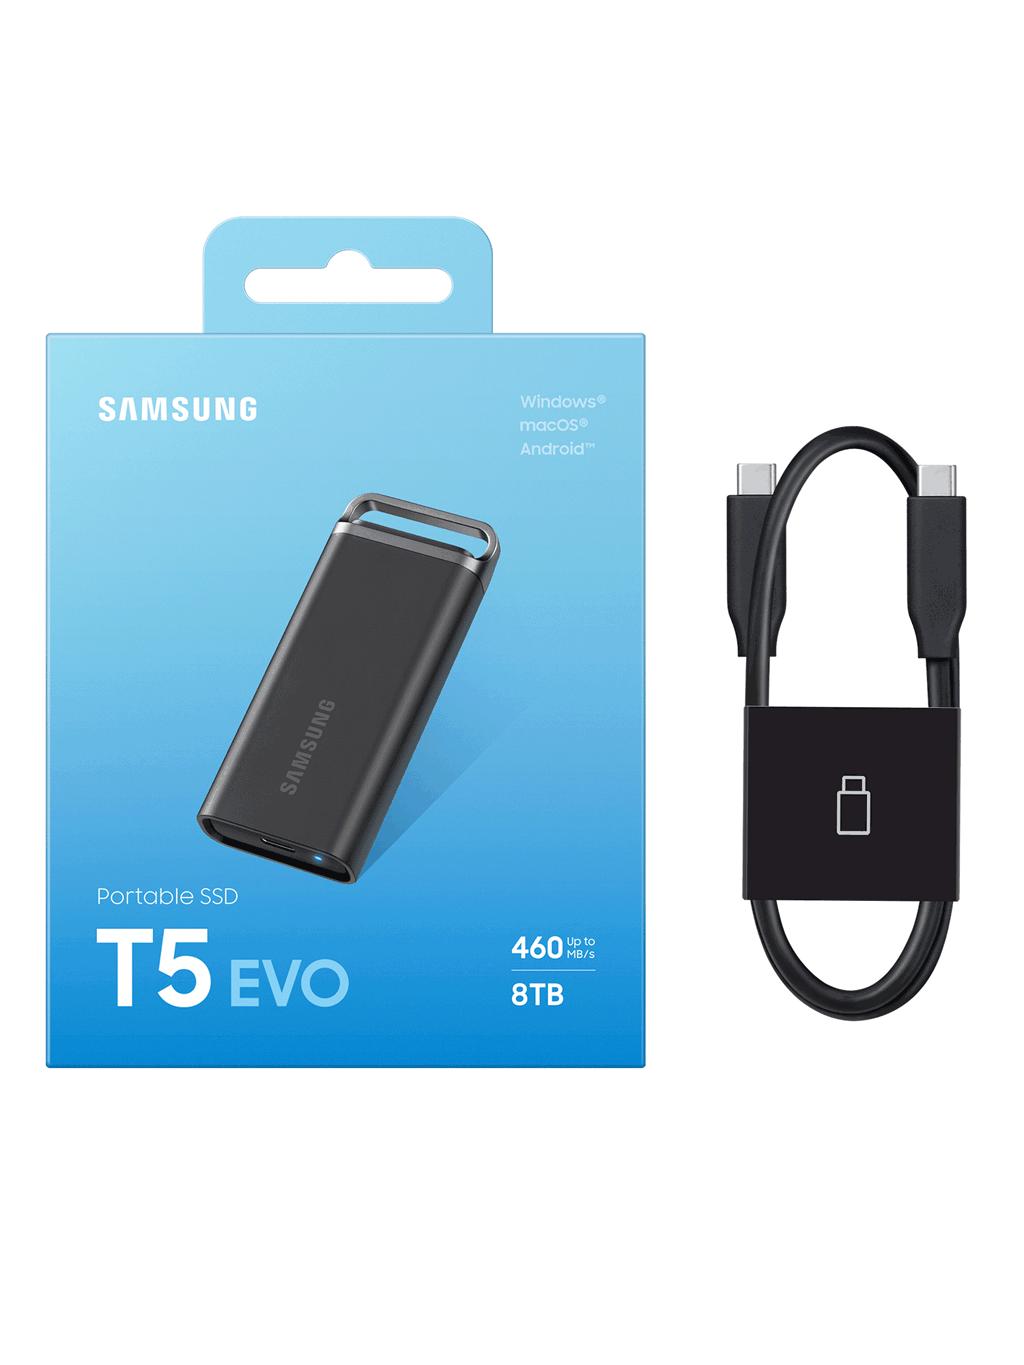 Samsung T5 EVO Puts 8TB in Your Pocket!